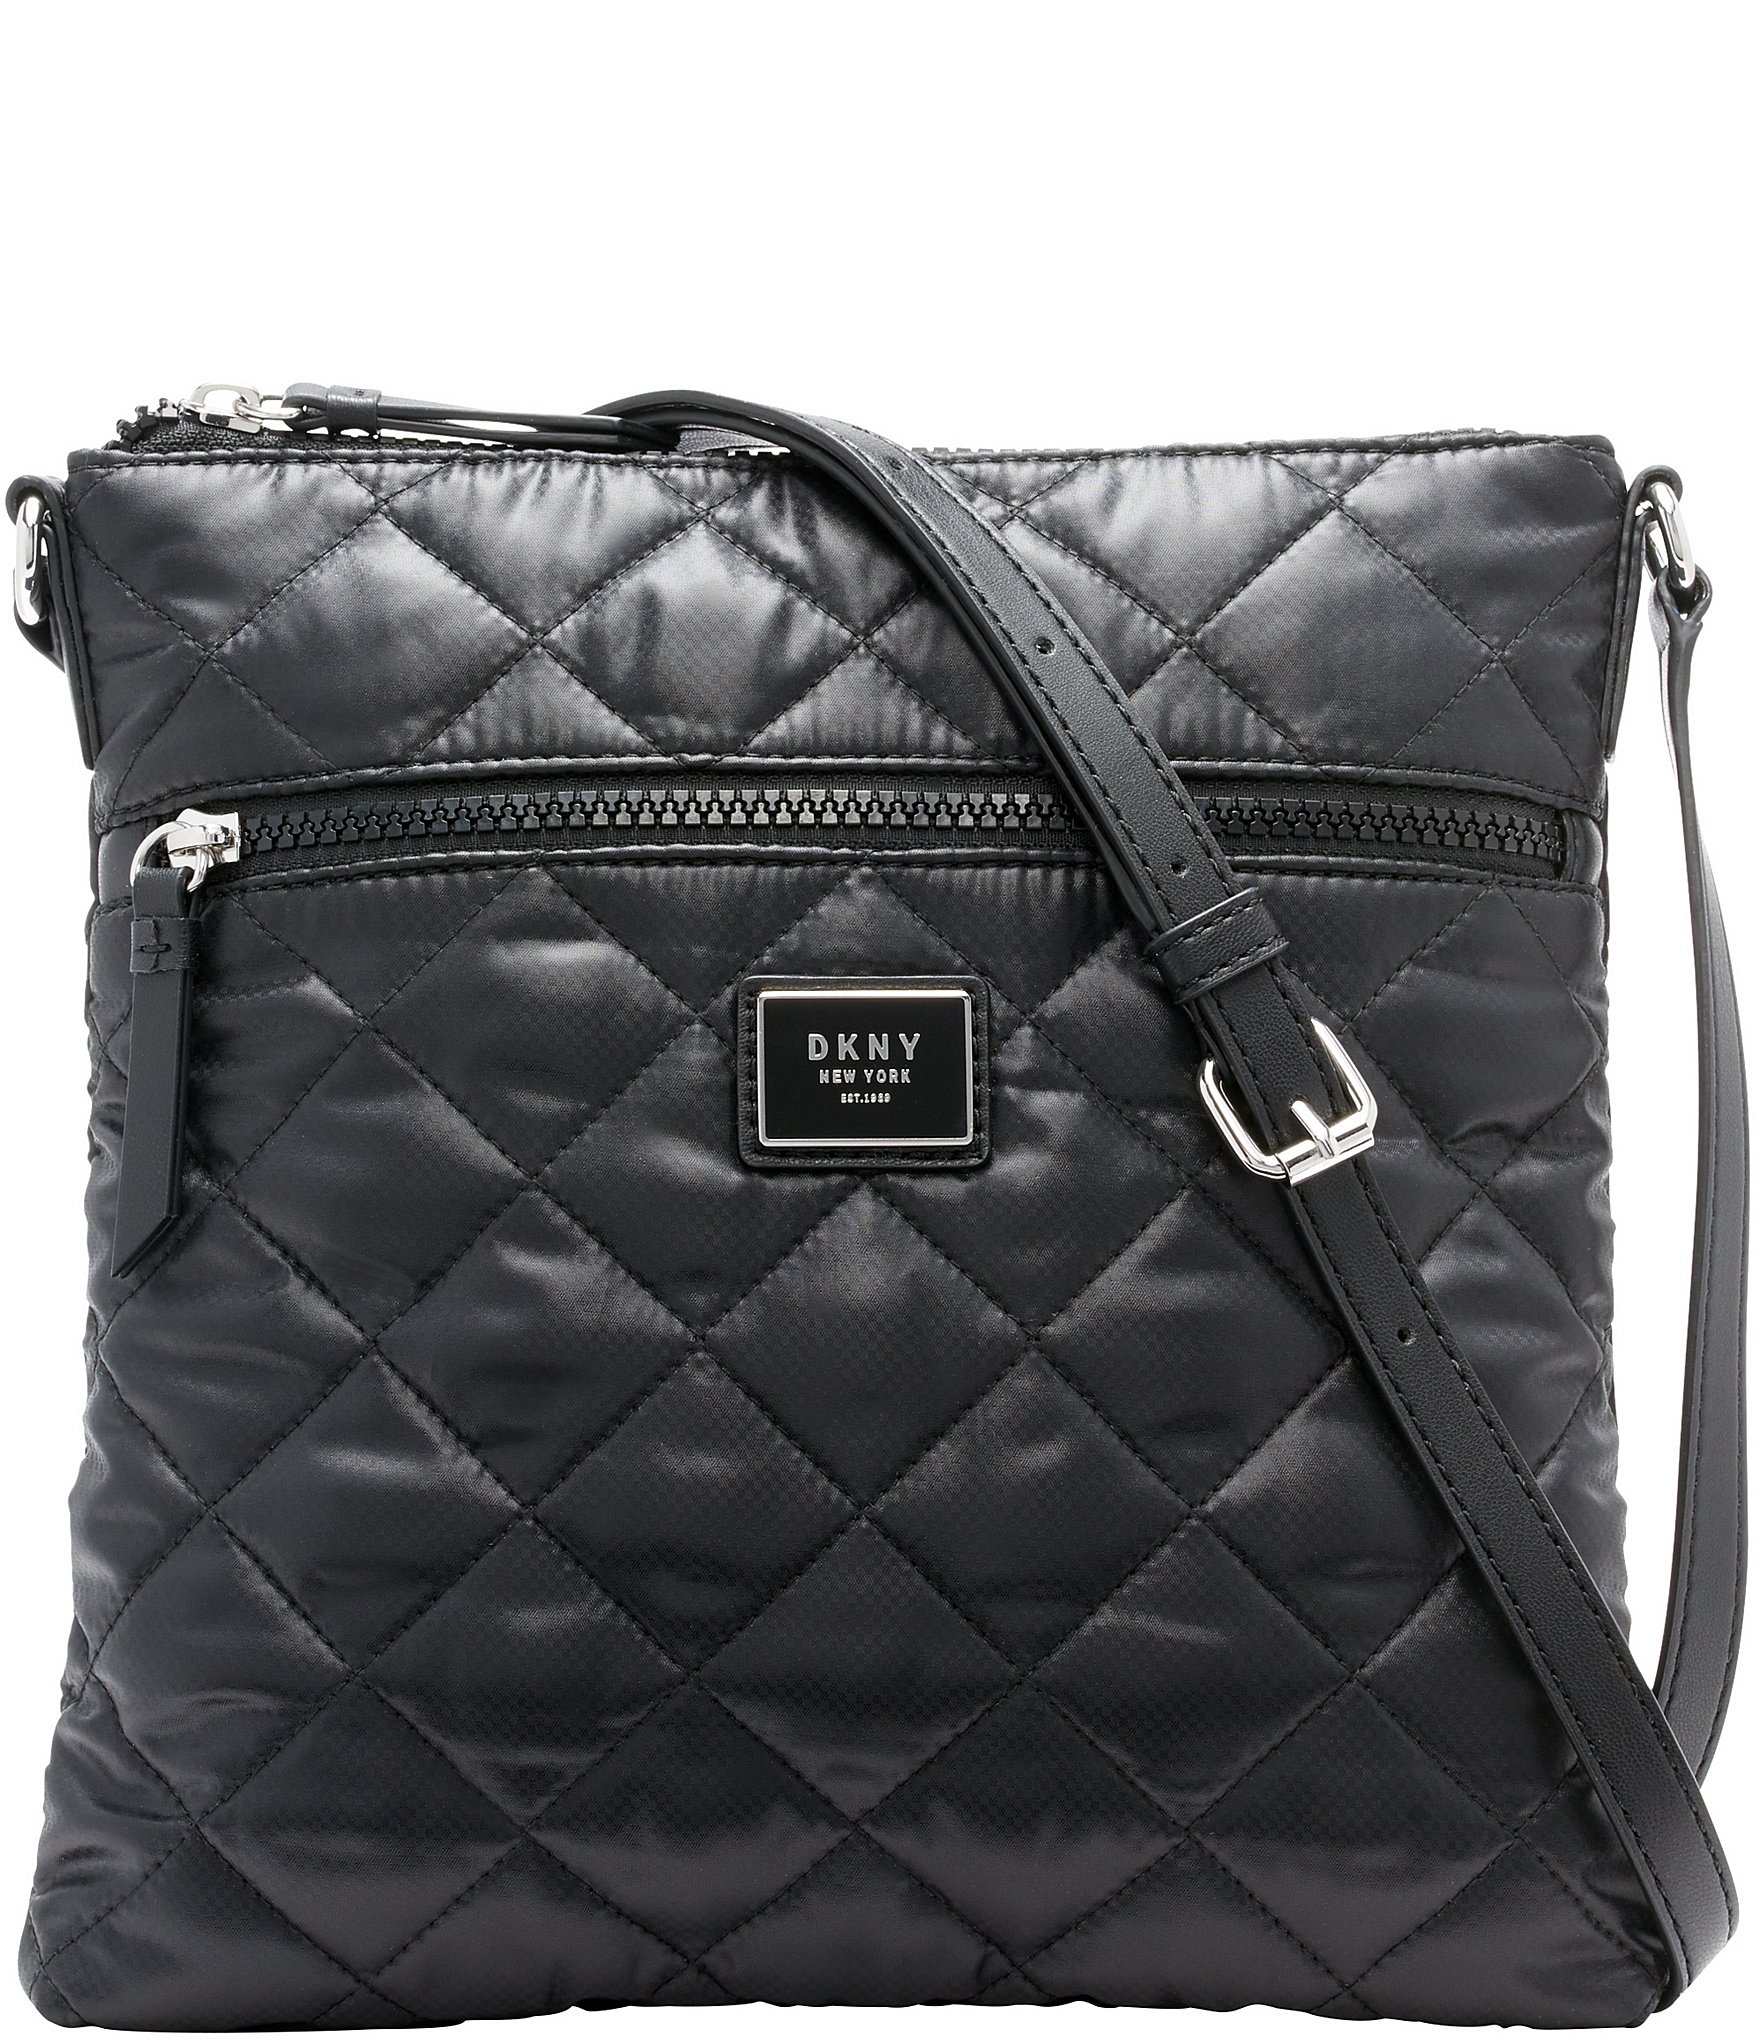 Nylon Quilted Cross-Body Bag